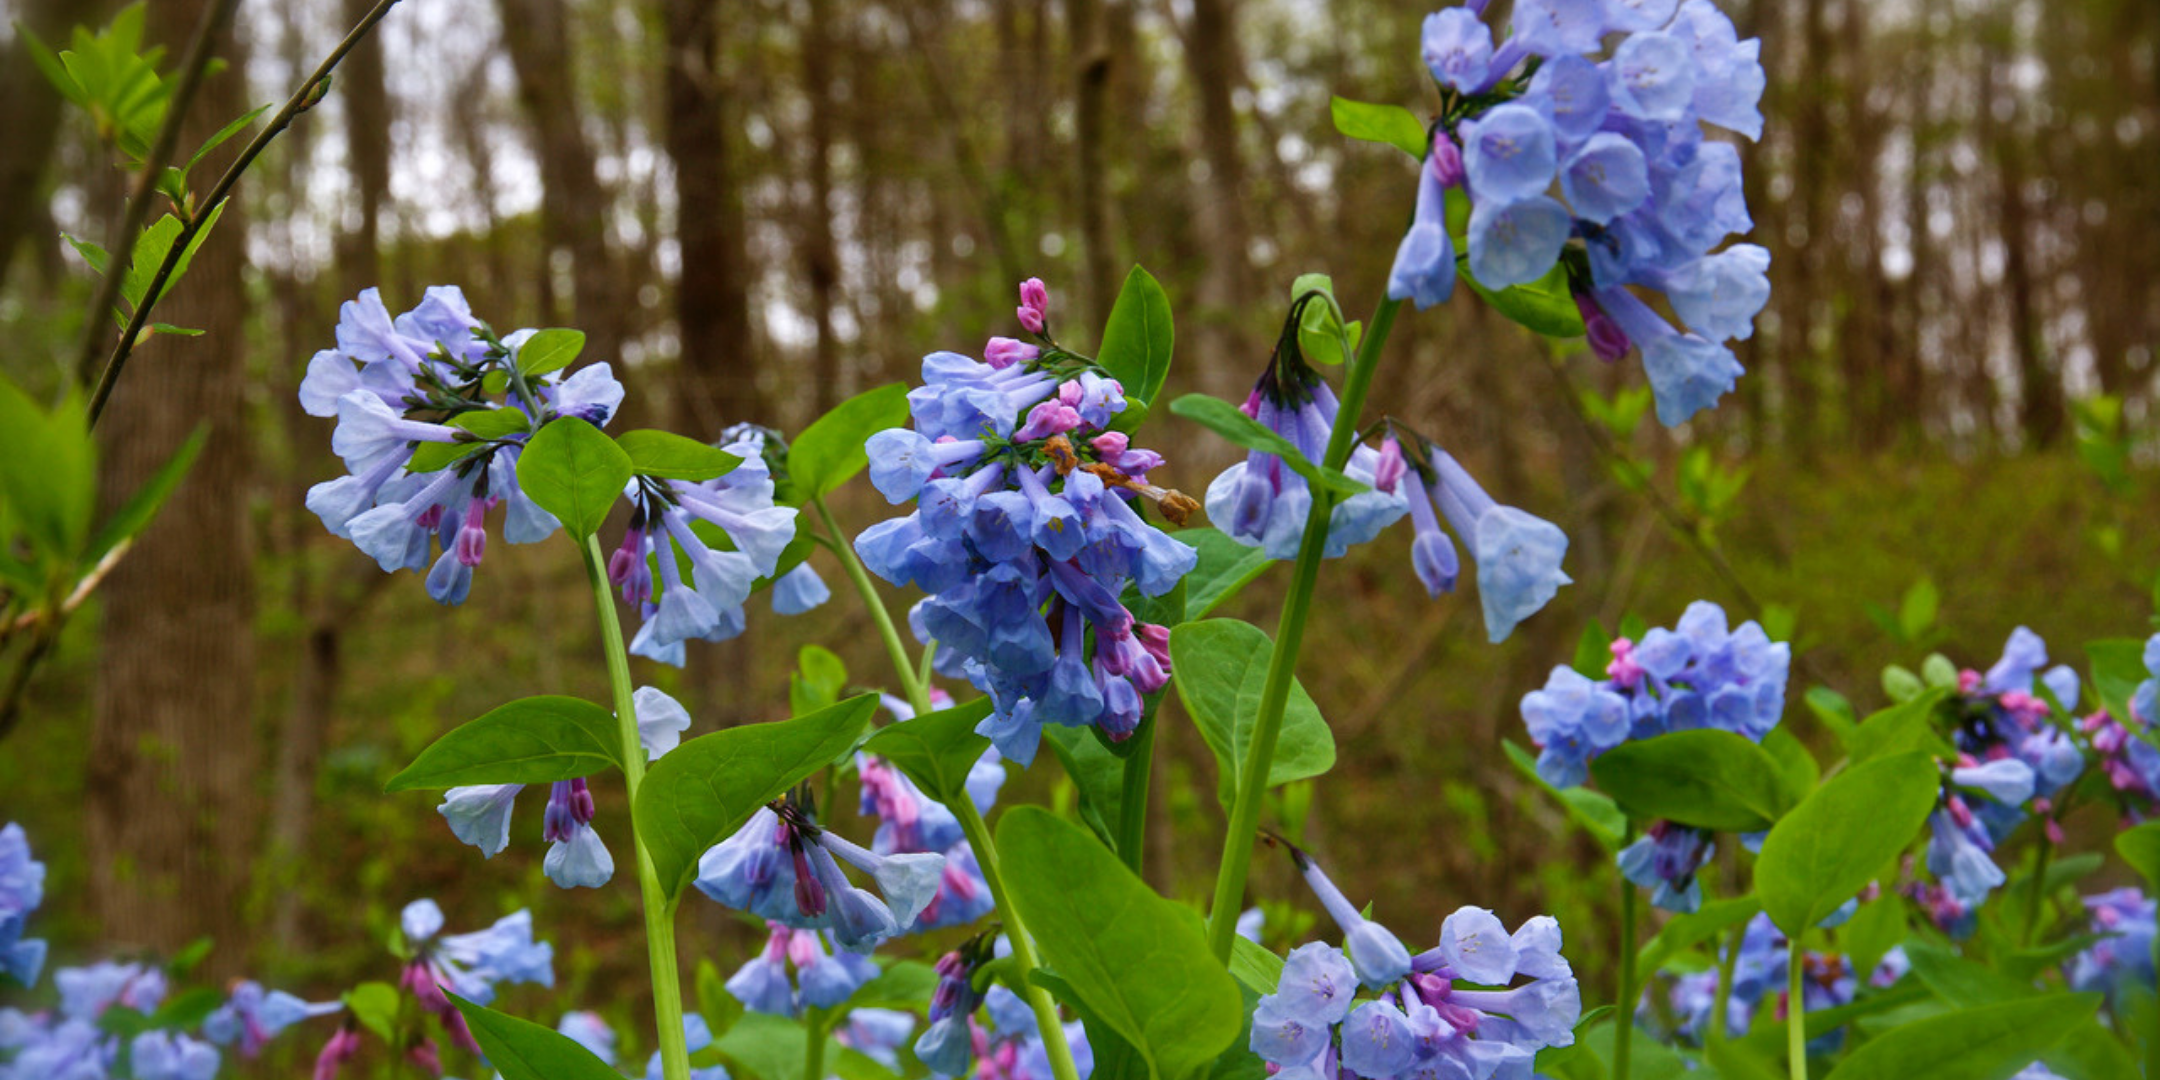 close up image of blue and purple flowers on green stalks